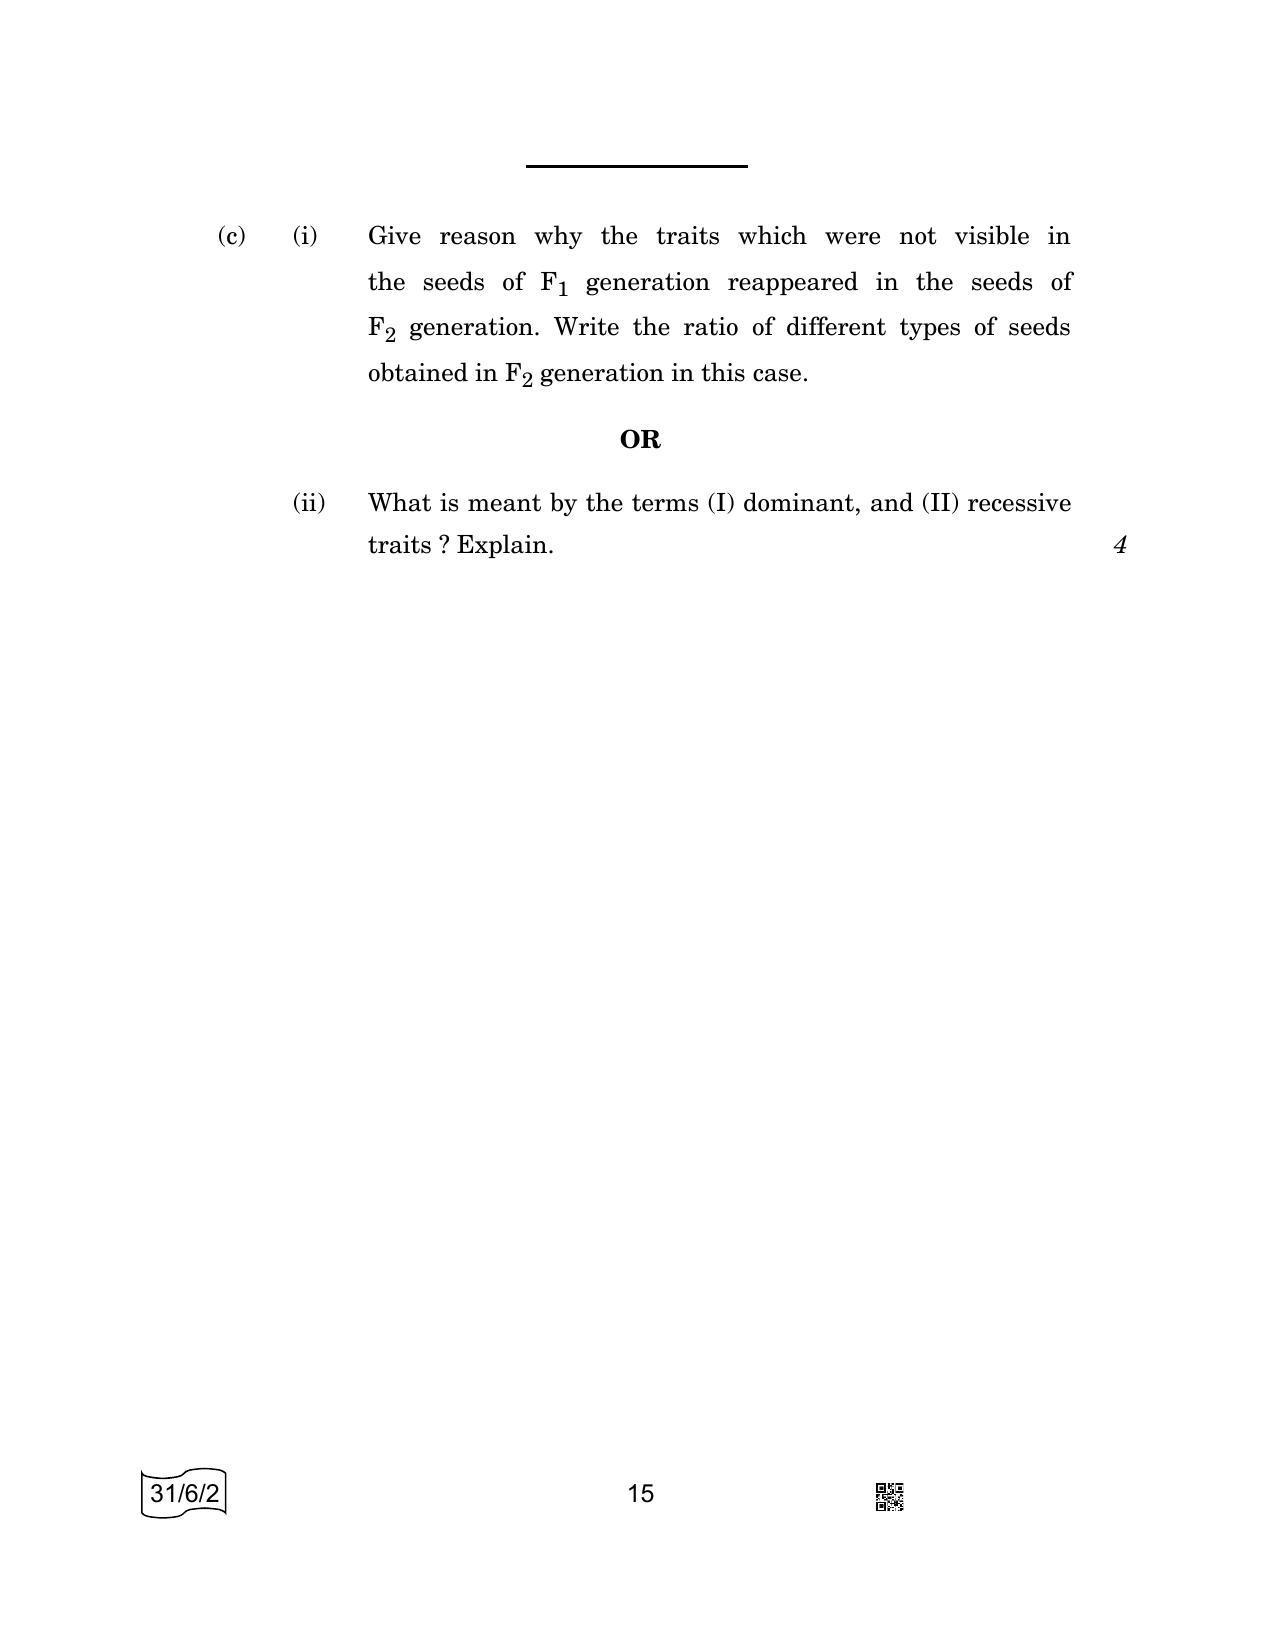 CBSE Class 10 31-6-2 SCIENCE 2022 Compartment Question Paper - Page 15